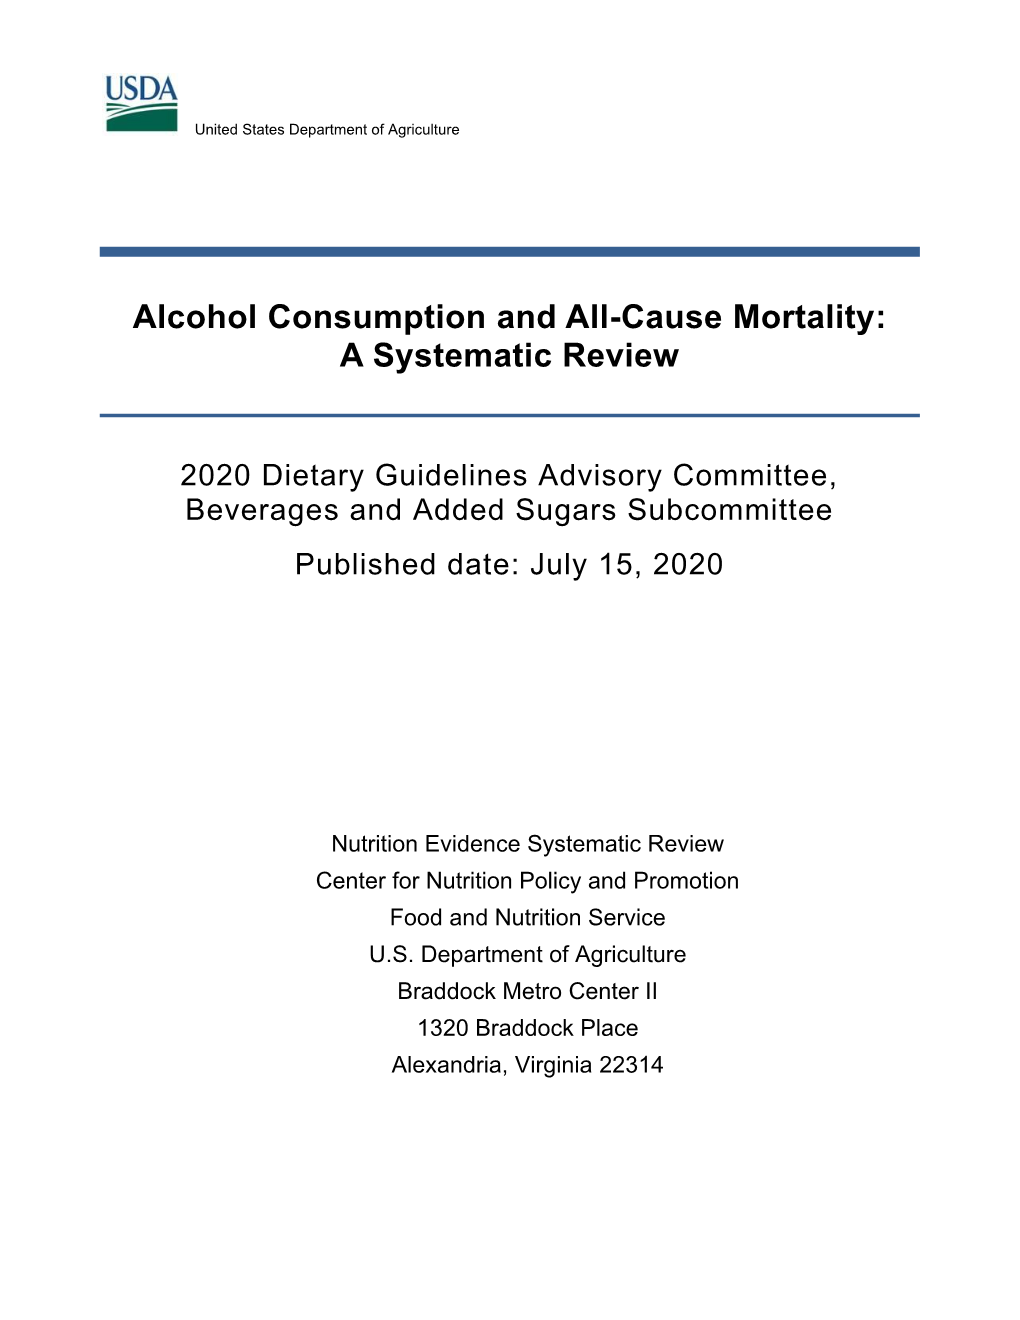 Alcohol Consumption and All-Cause Mortality: a Systematic Review